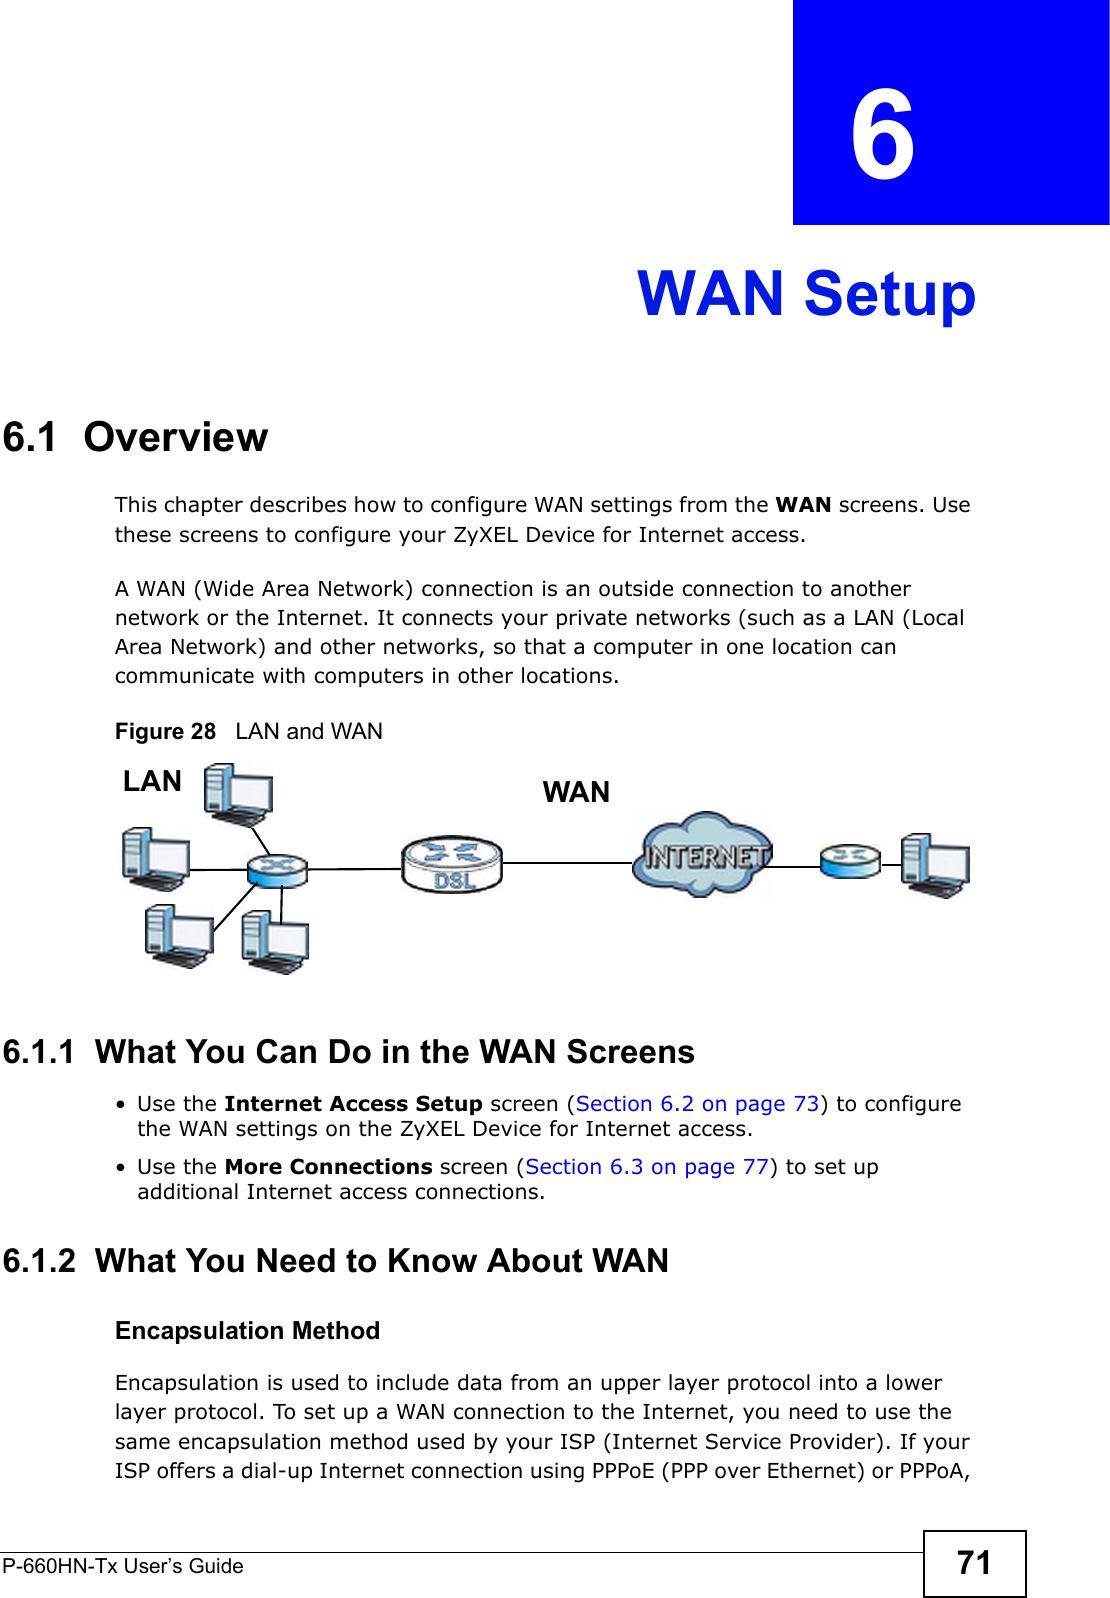 P-660HN-Tx User’s Guide 71CHAPTER  6 WAN Setup6.1  OverviewThis chapter describes how to configure WAN settings from the WAN screens. Use these screens to configure your ZyXEL Device for Internet access.A WAN (Wide Area Network) connection is an outside connection to another network or the Internet. It connects your private networks (such as a LAN (Local Area Network) and other networks, so that a computer in one location can communicate with computers in other locations.Figure 28   LAN and WAN6.1.1  What You Can Do in the WAN Screens•Use the Internet Access Setup screen (Section 6.2 on page 73) to configure the WAN settings on the ZyXEL Device for Internet access.•Use the More Connections screen (Section 6.3 on page 77) to set up additional Internet access connections.6.1.2  What You Need to Know About WANEncapsulation MethodEncapsulation is used to include data from an upper layer protocol into a lower layer protocol. To set up a WAN connection to the Internet, you need to use the same encapsulation method used by your ISP (Internet Service Provider). If your ISP offers a dial-up Internet connection using PPPoE (PPP over Ethernet) or PPPoA, WANLAN